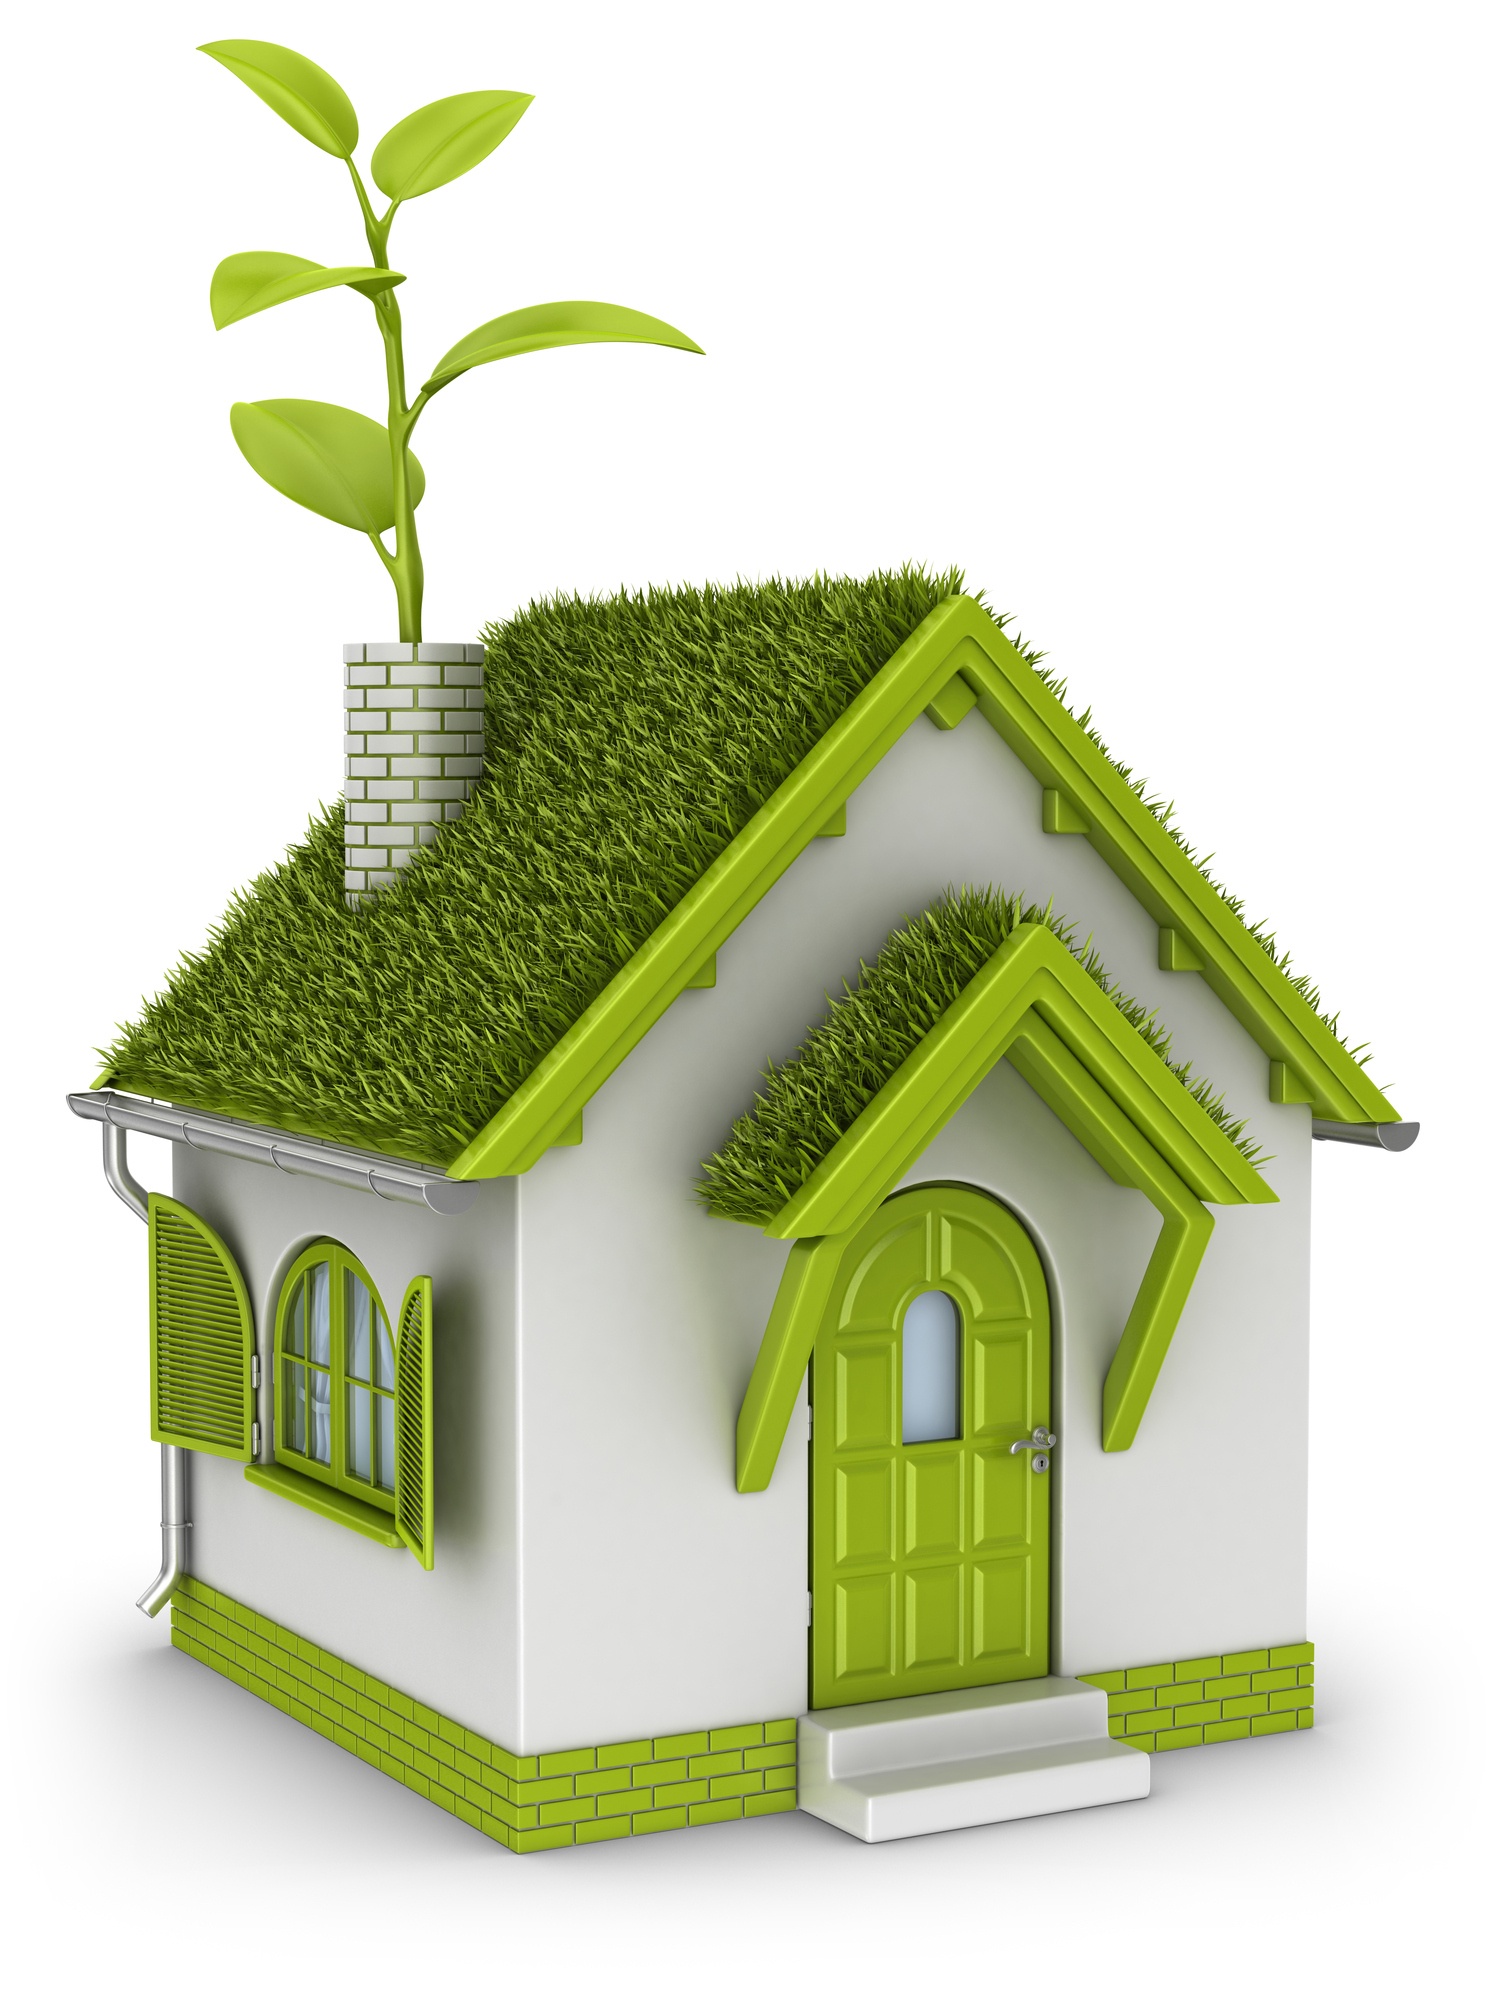 Younger Homeowners More Likely to Make Green Home Improvements